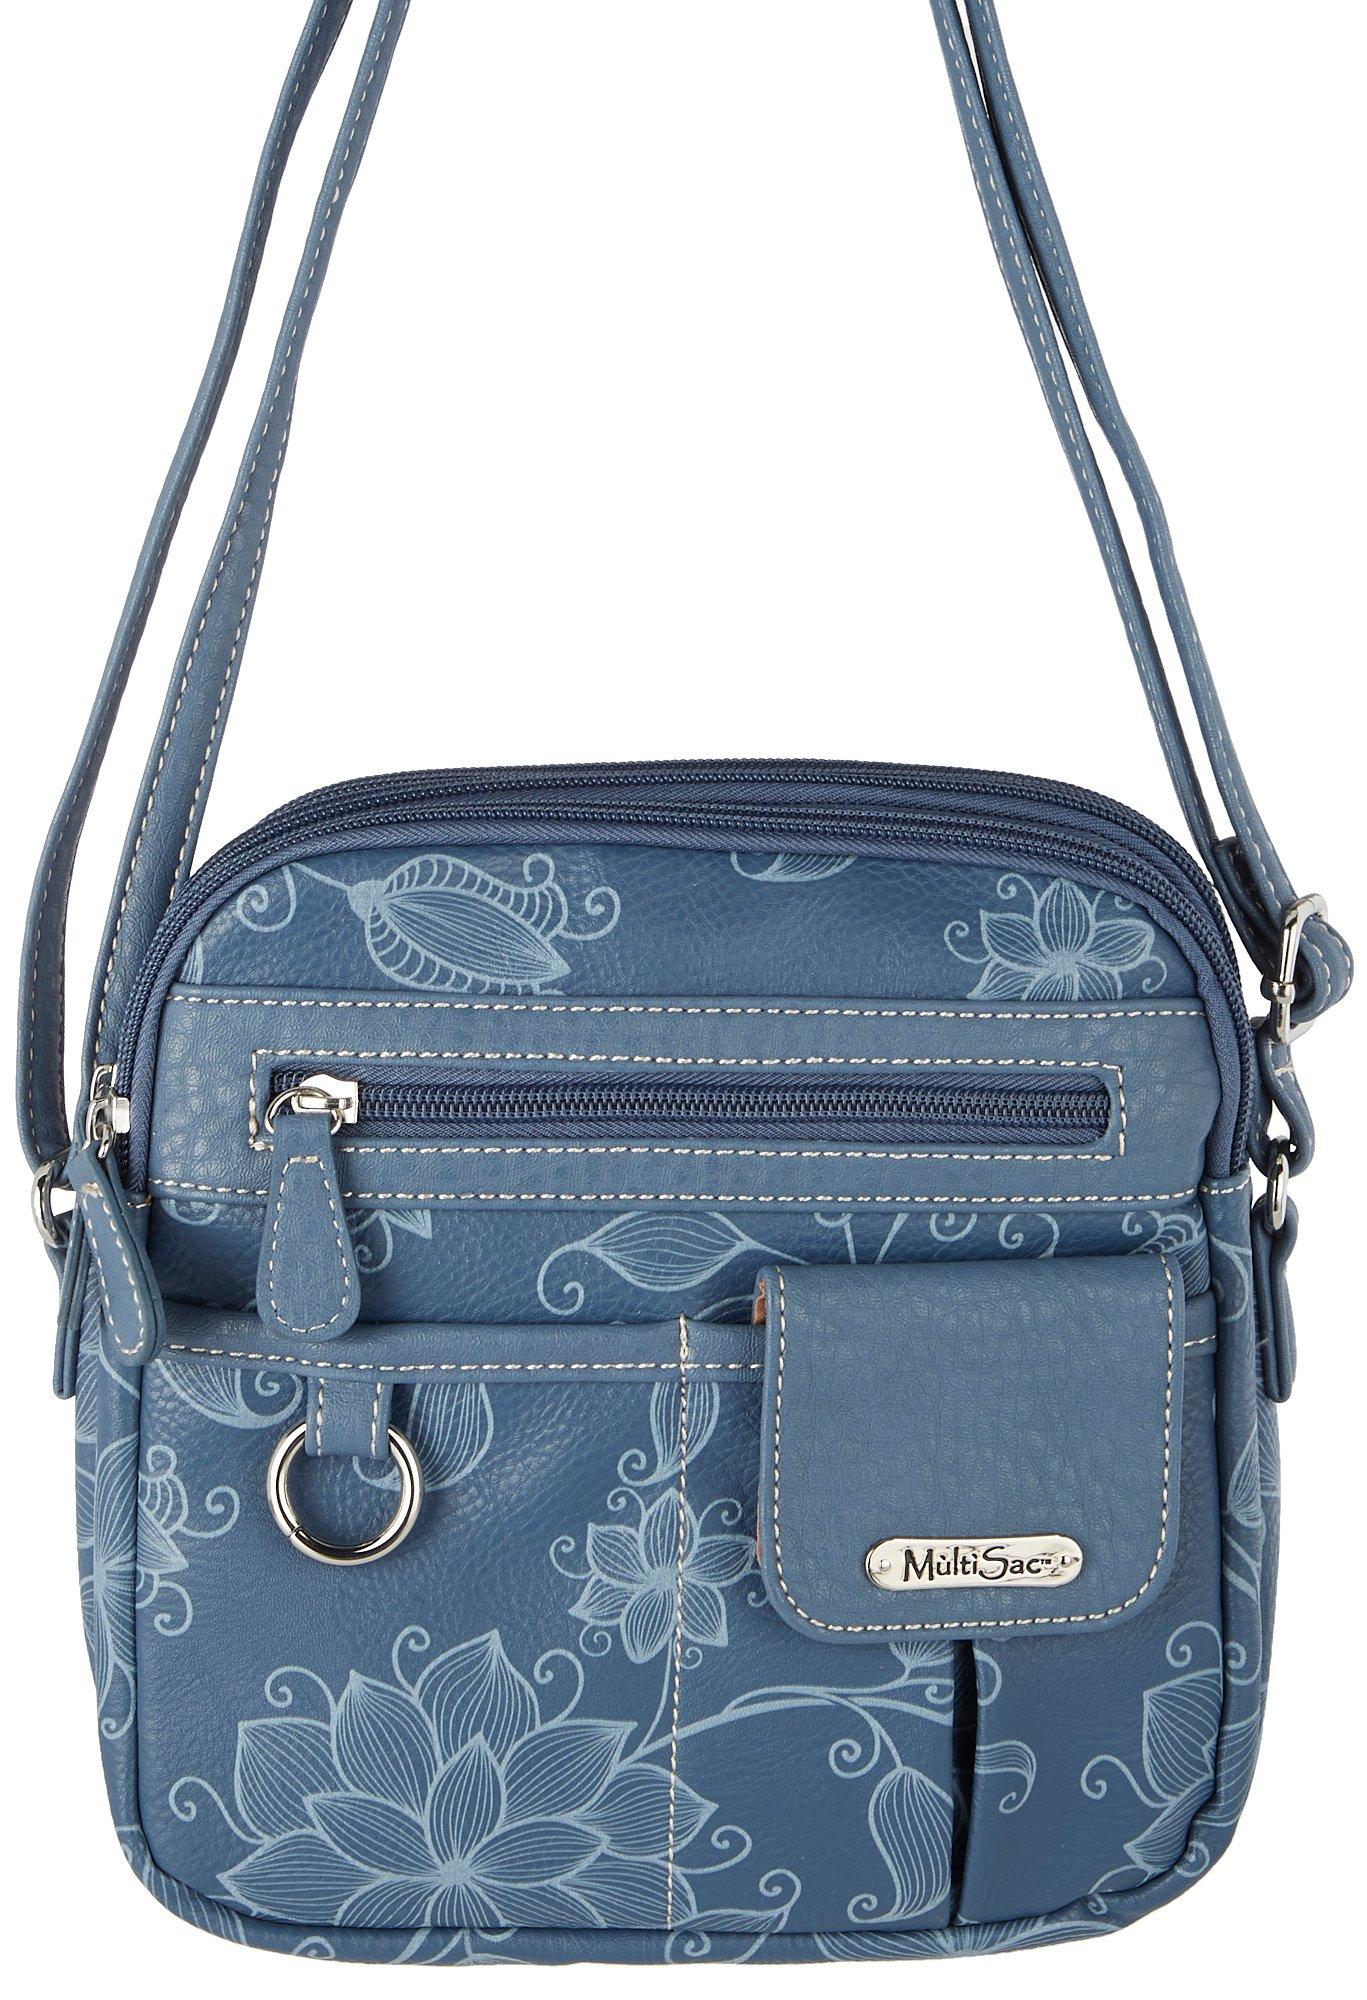 MultiSac  Floral North South Crossbody